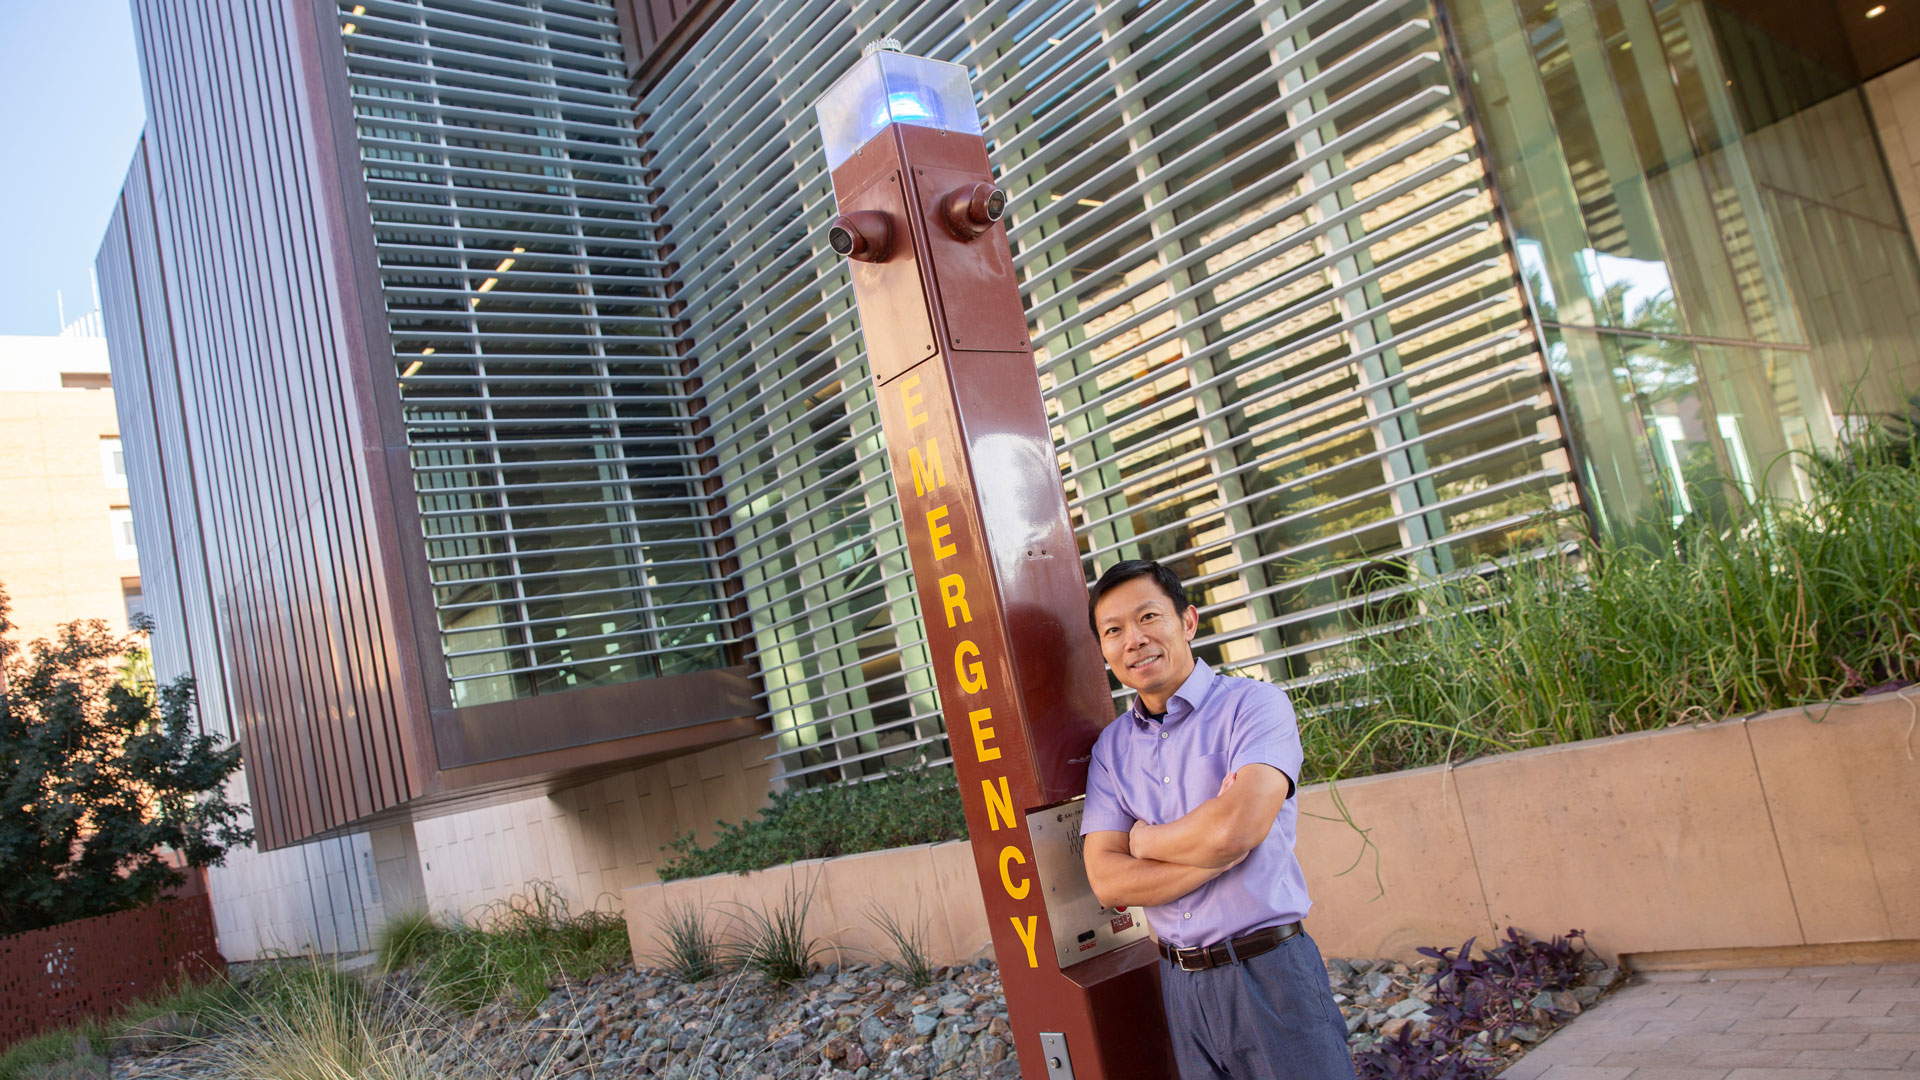 Ming Zhao stands next to an ASU campus blue light post.